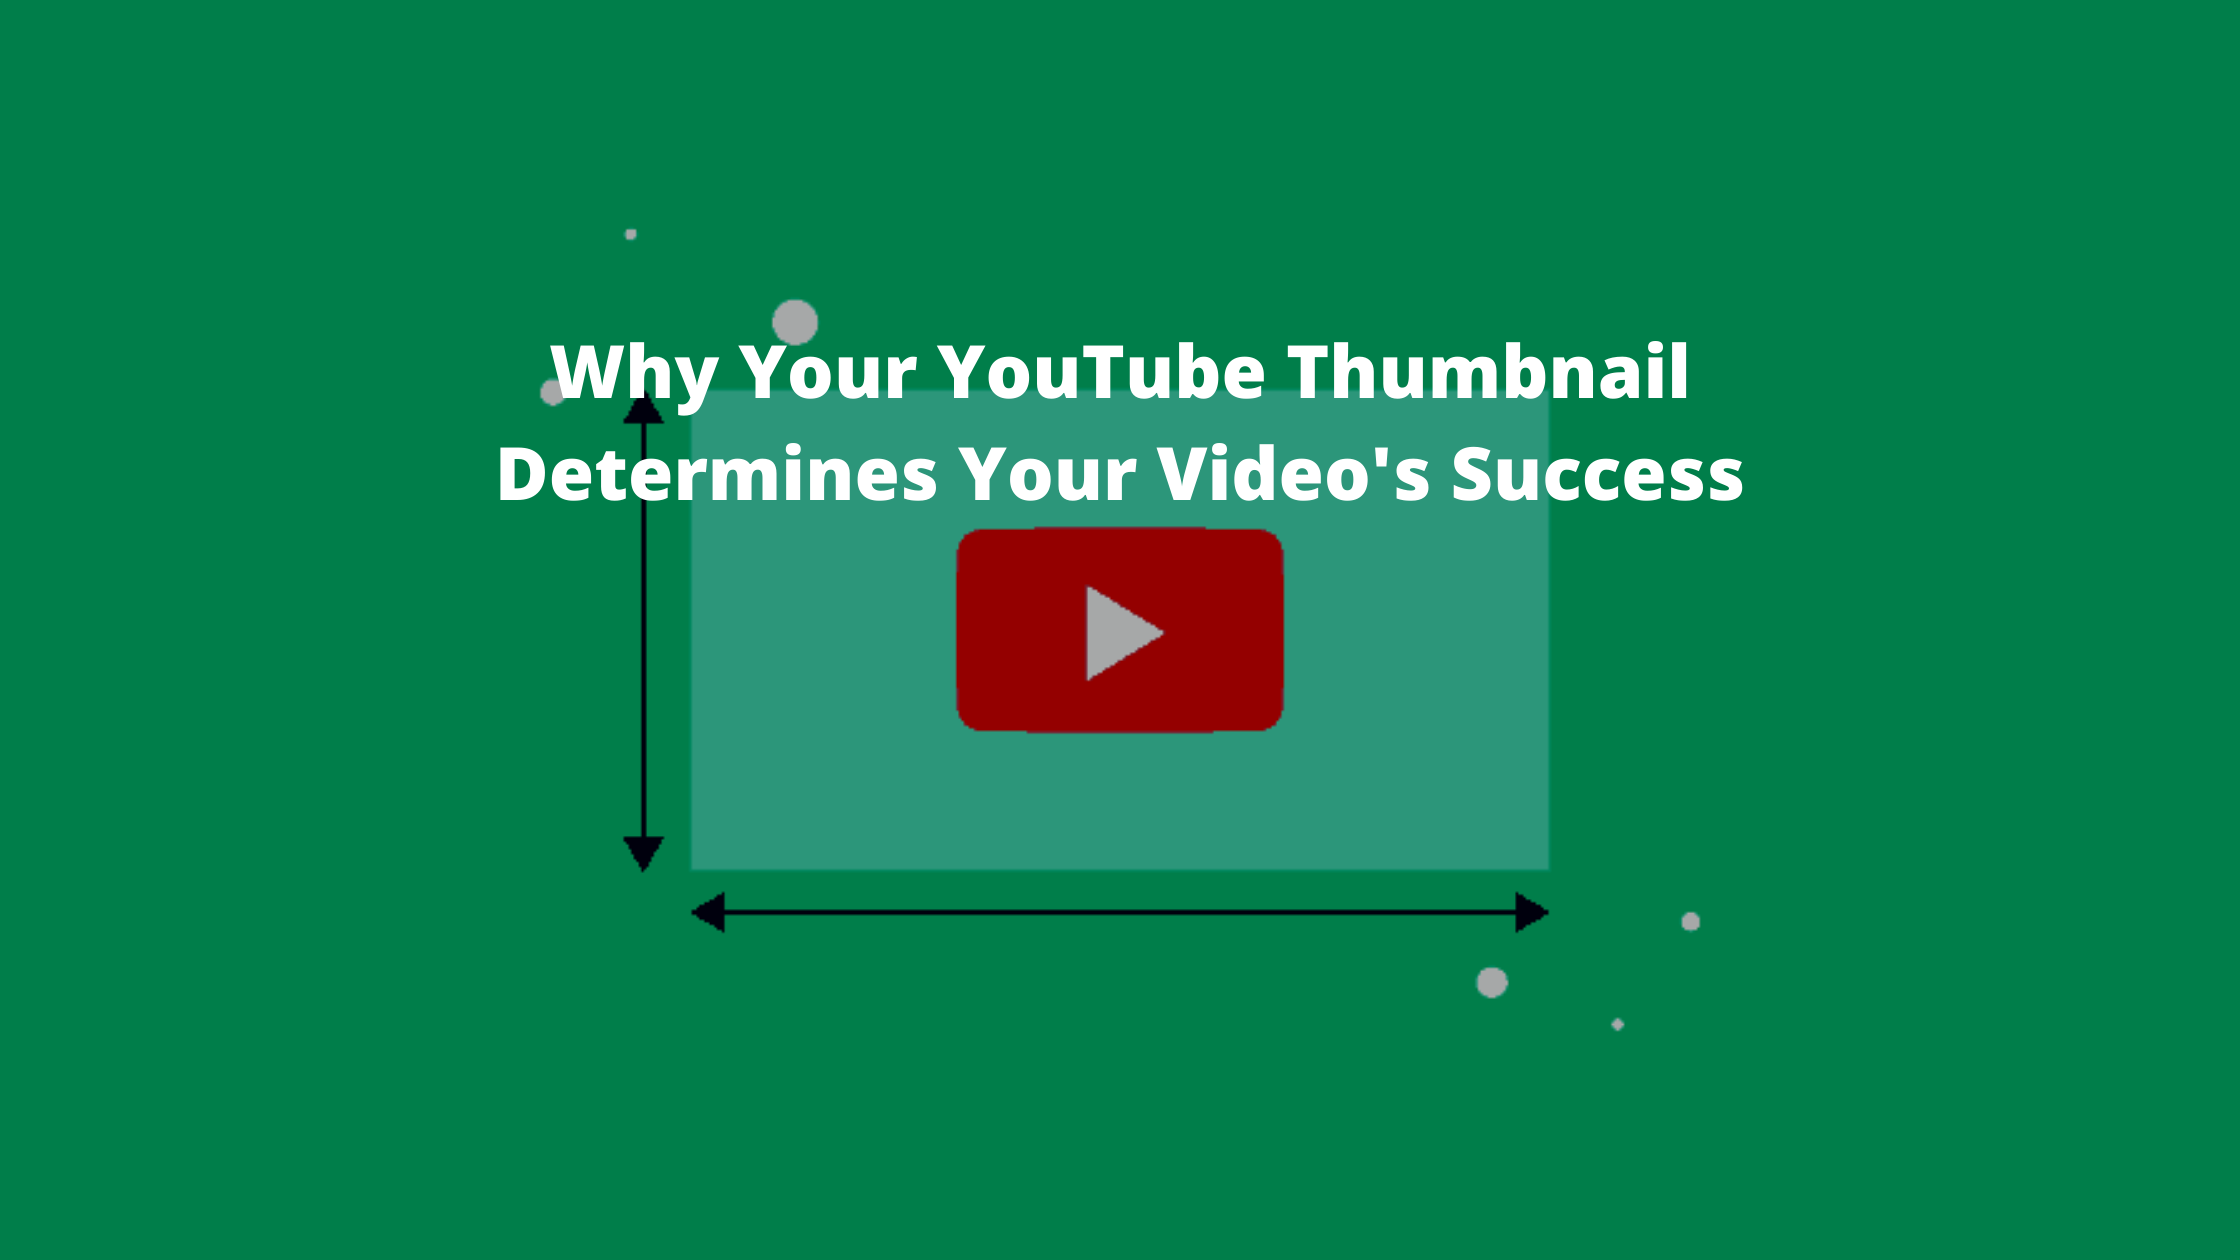 Why Your YouTube Thumbnail Determines Your Video's Success